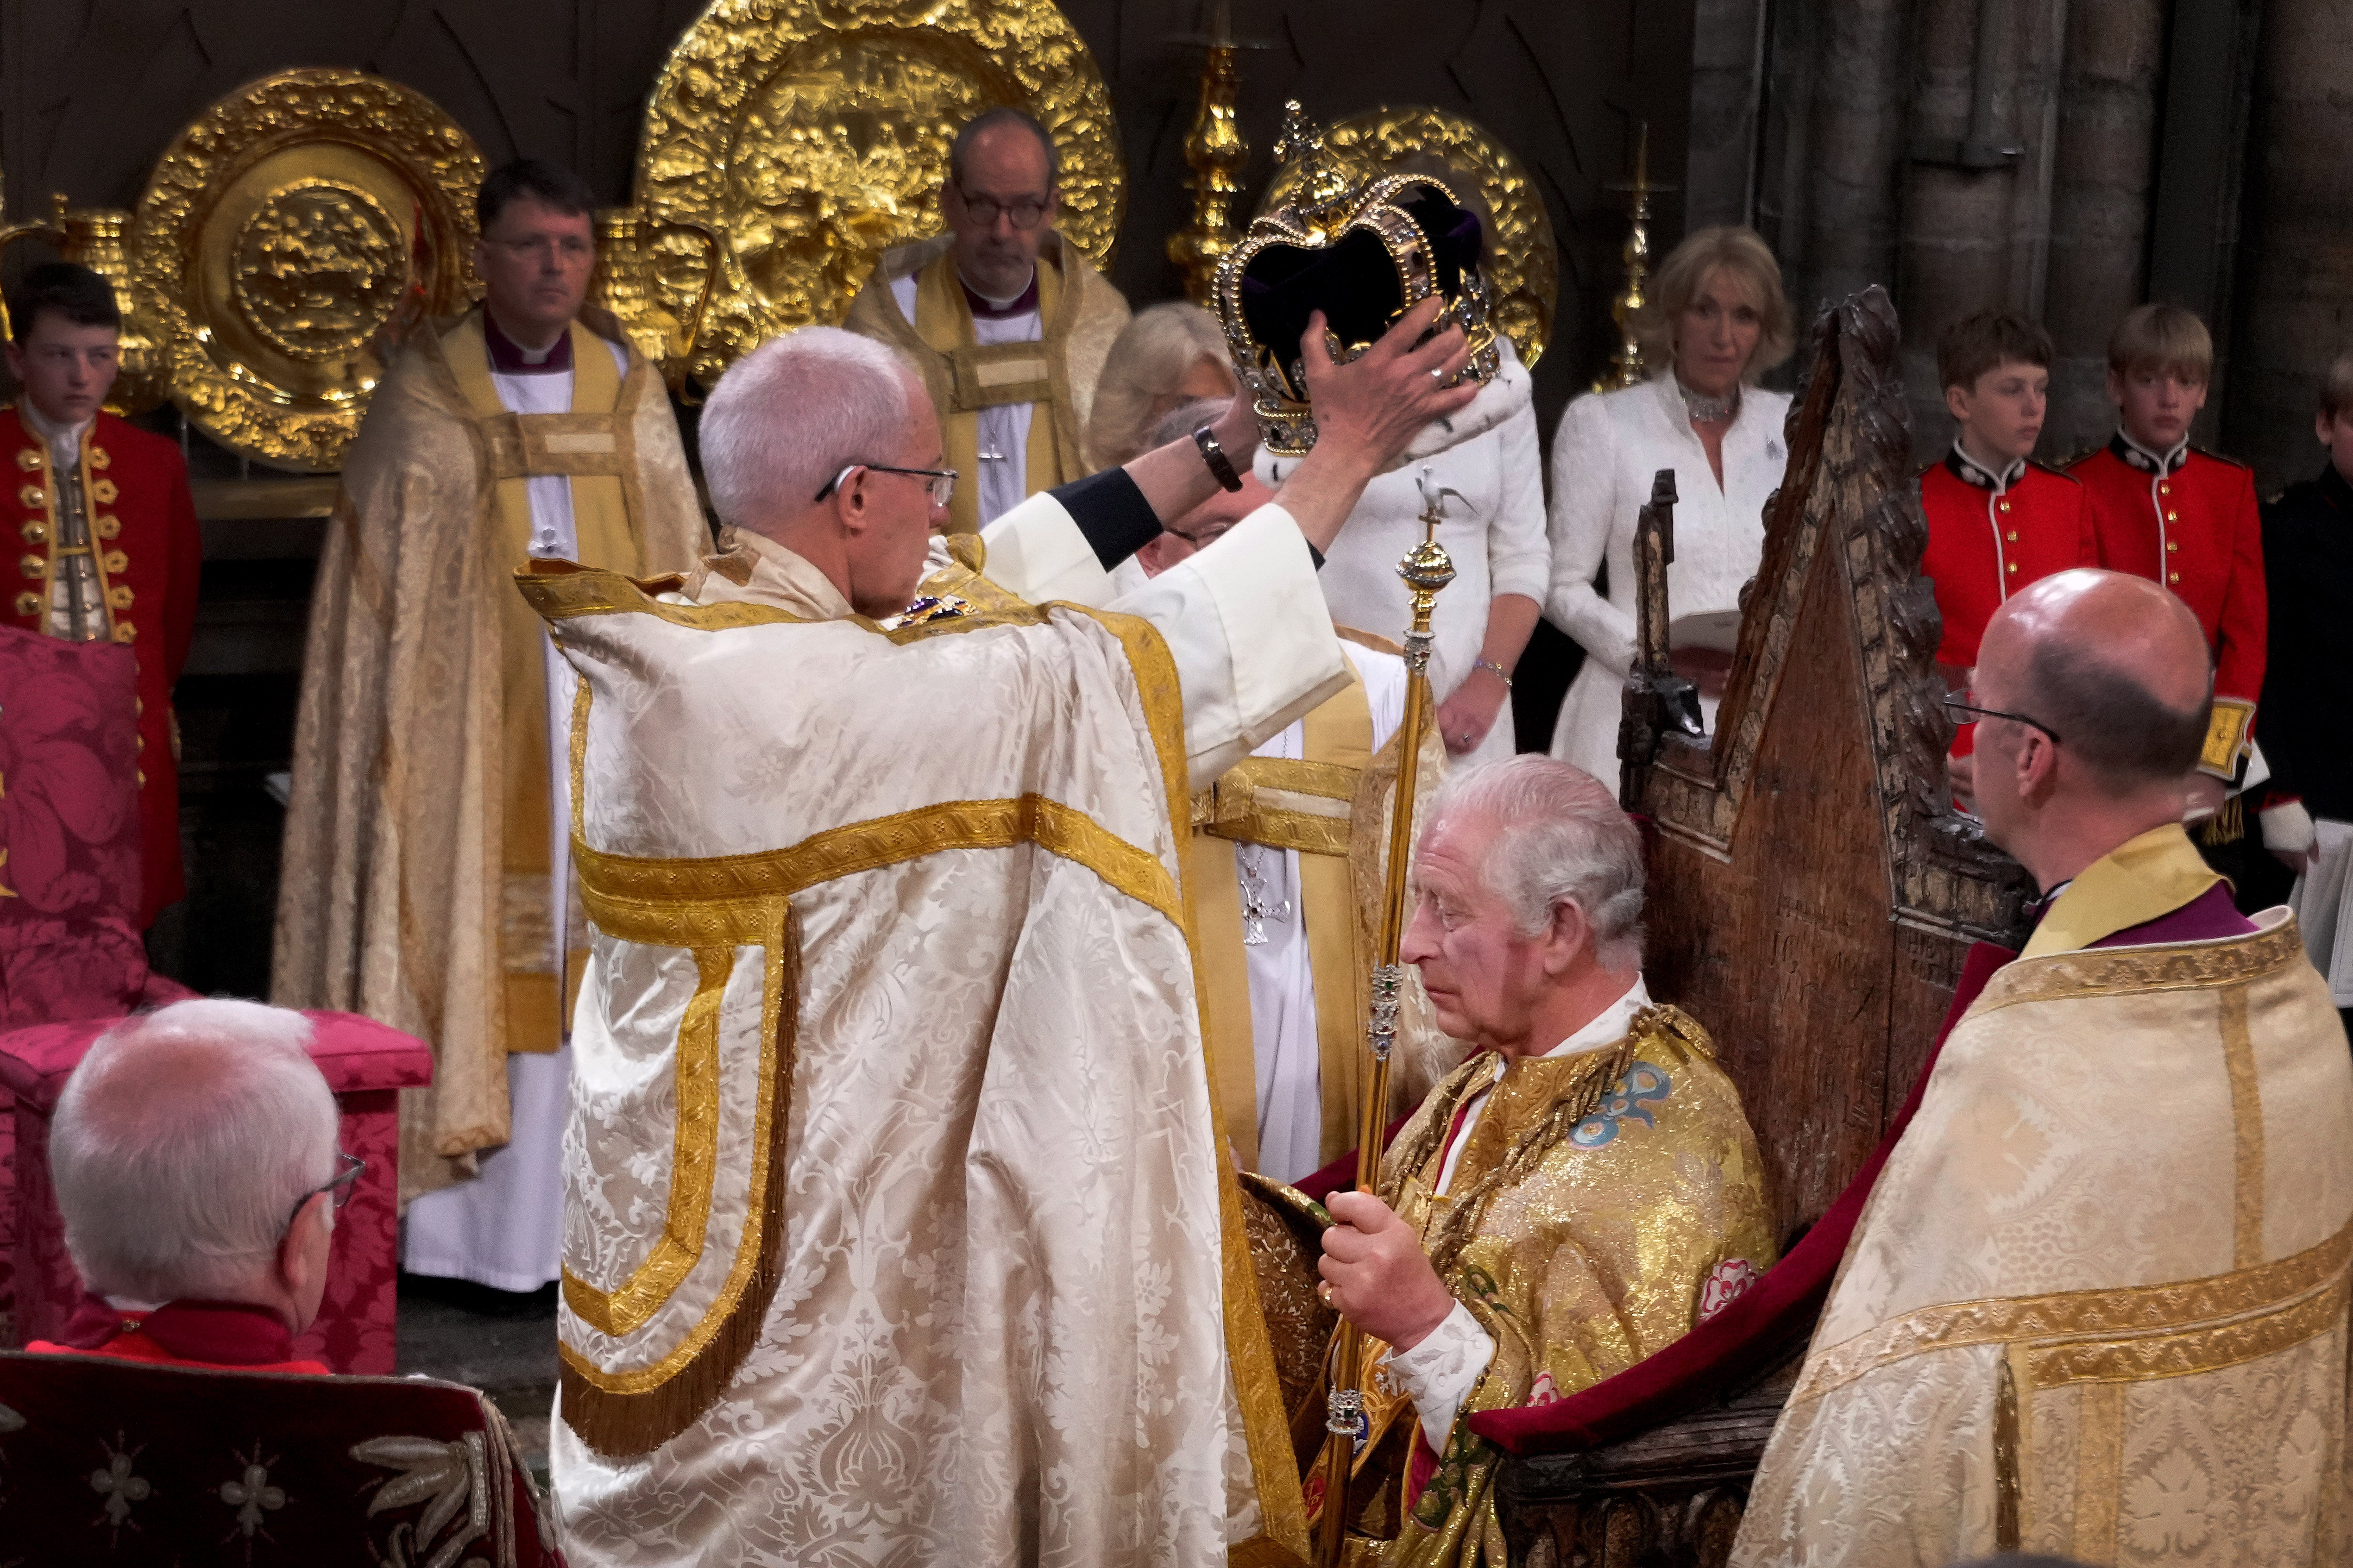 King Charles III is crowned by the Archbishop of Canterbury